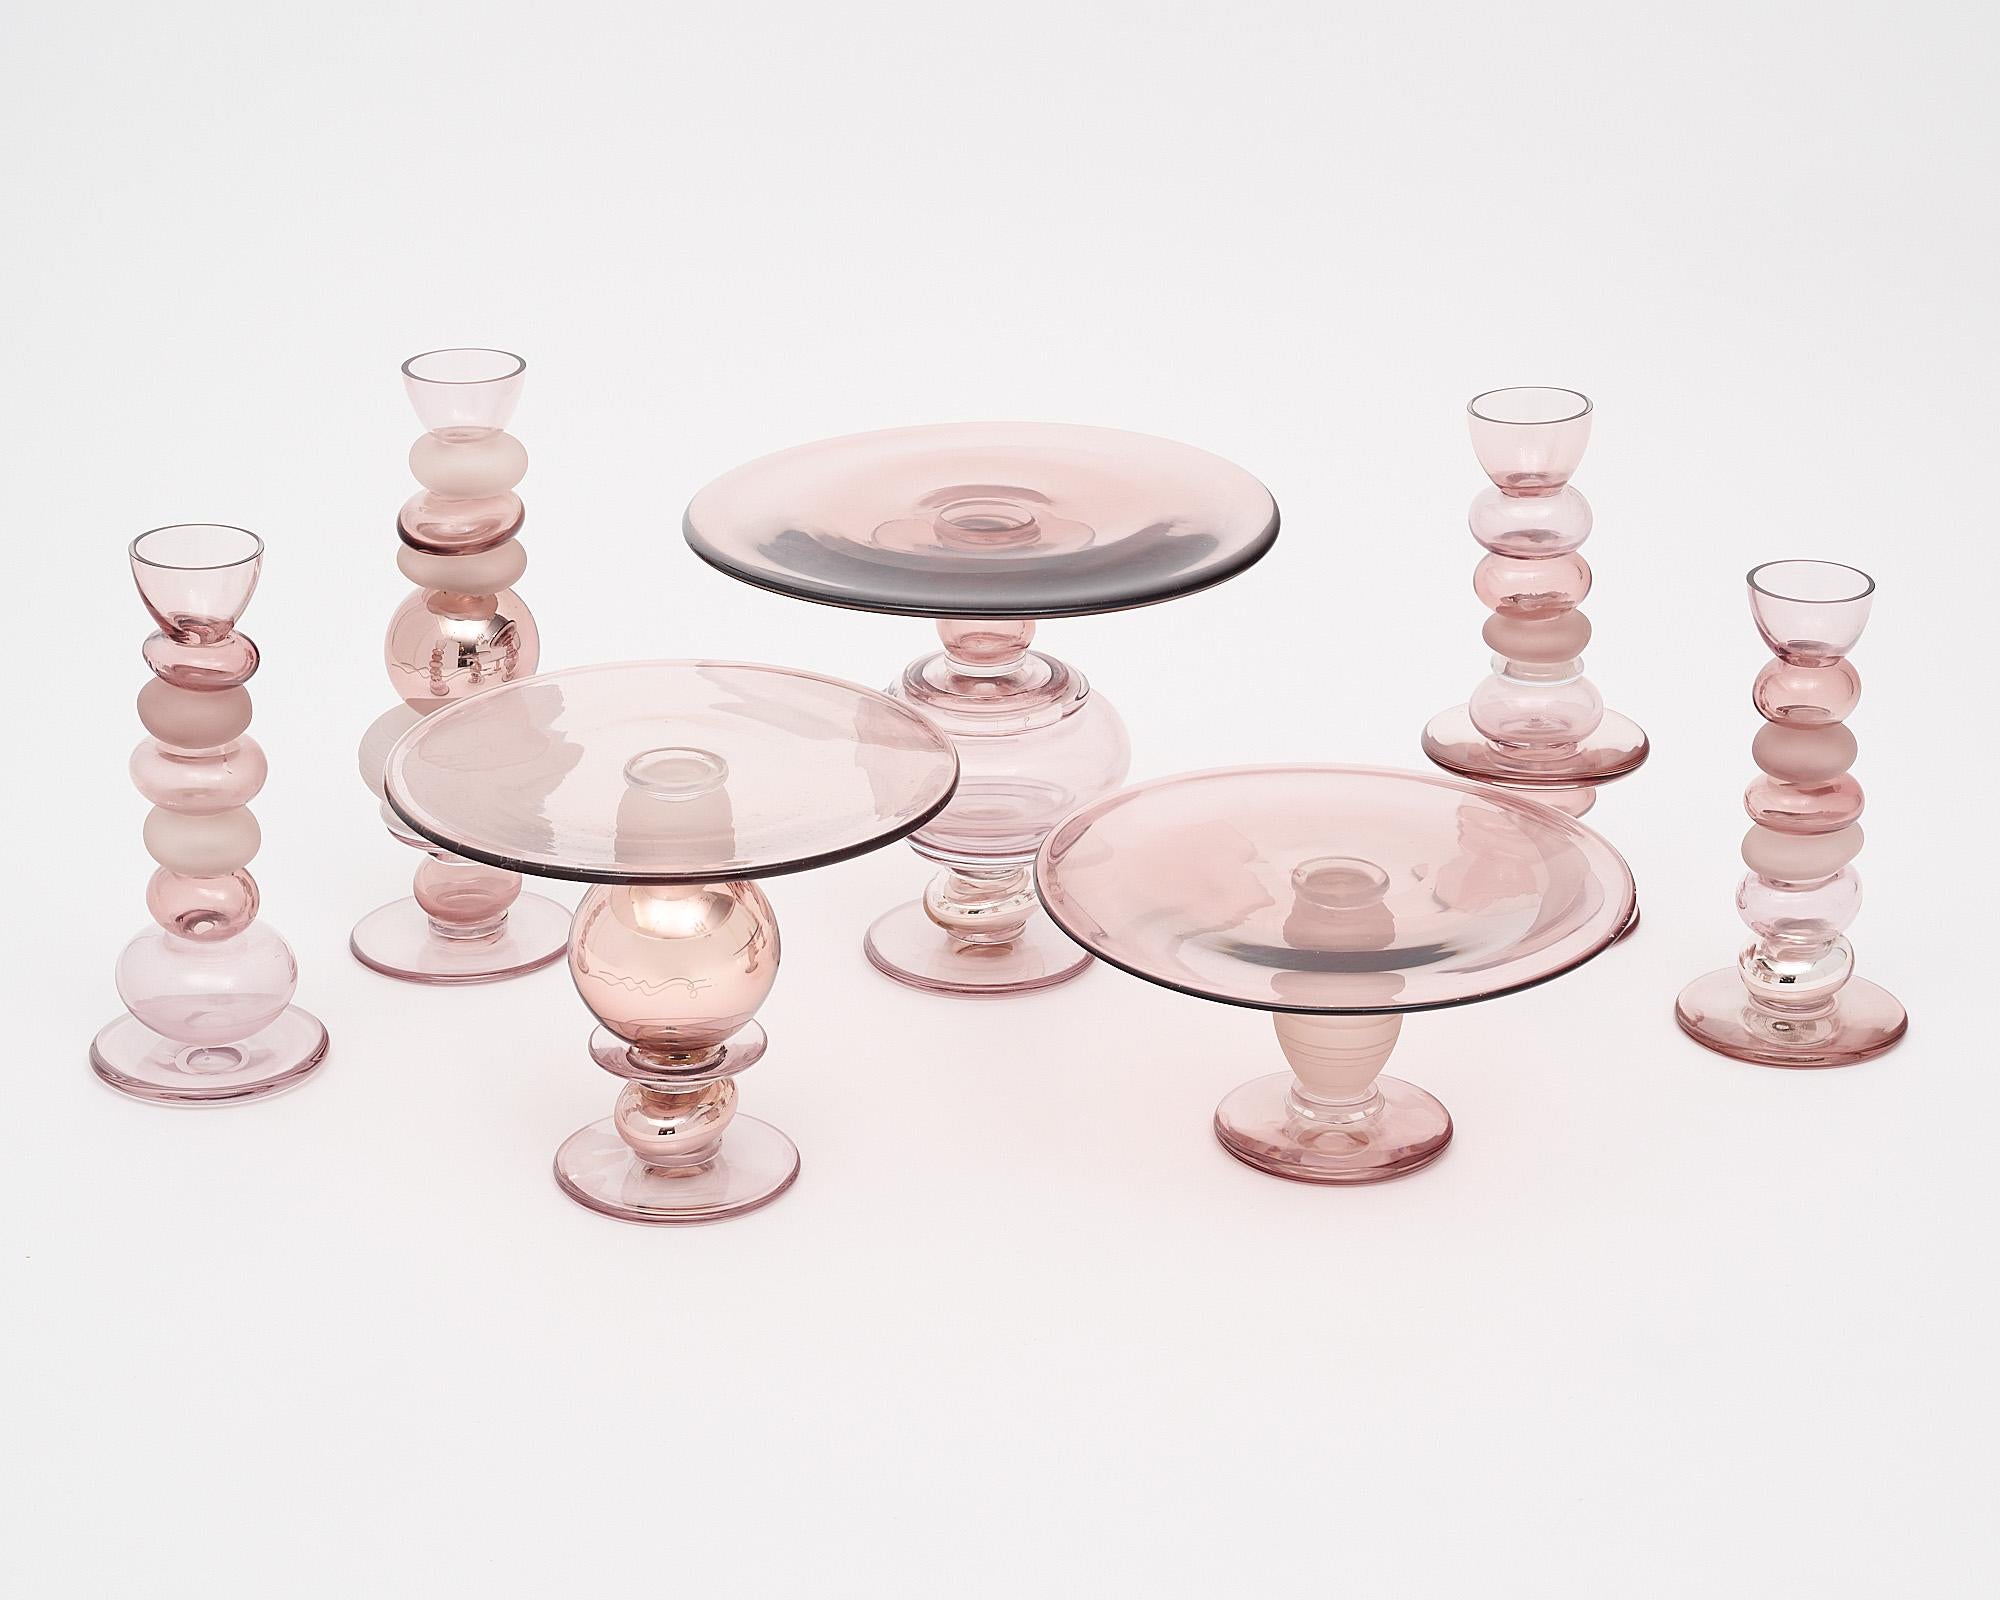 Set of three cake stands and four candle sticks made of hand-blown Murano glass. This group is made in a beautiful dusty rose pink tone, and includes alternating finishes, which glass elements in transparent glass, frosted glass, and mirrored glass.